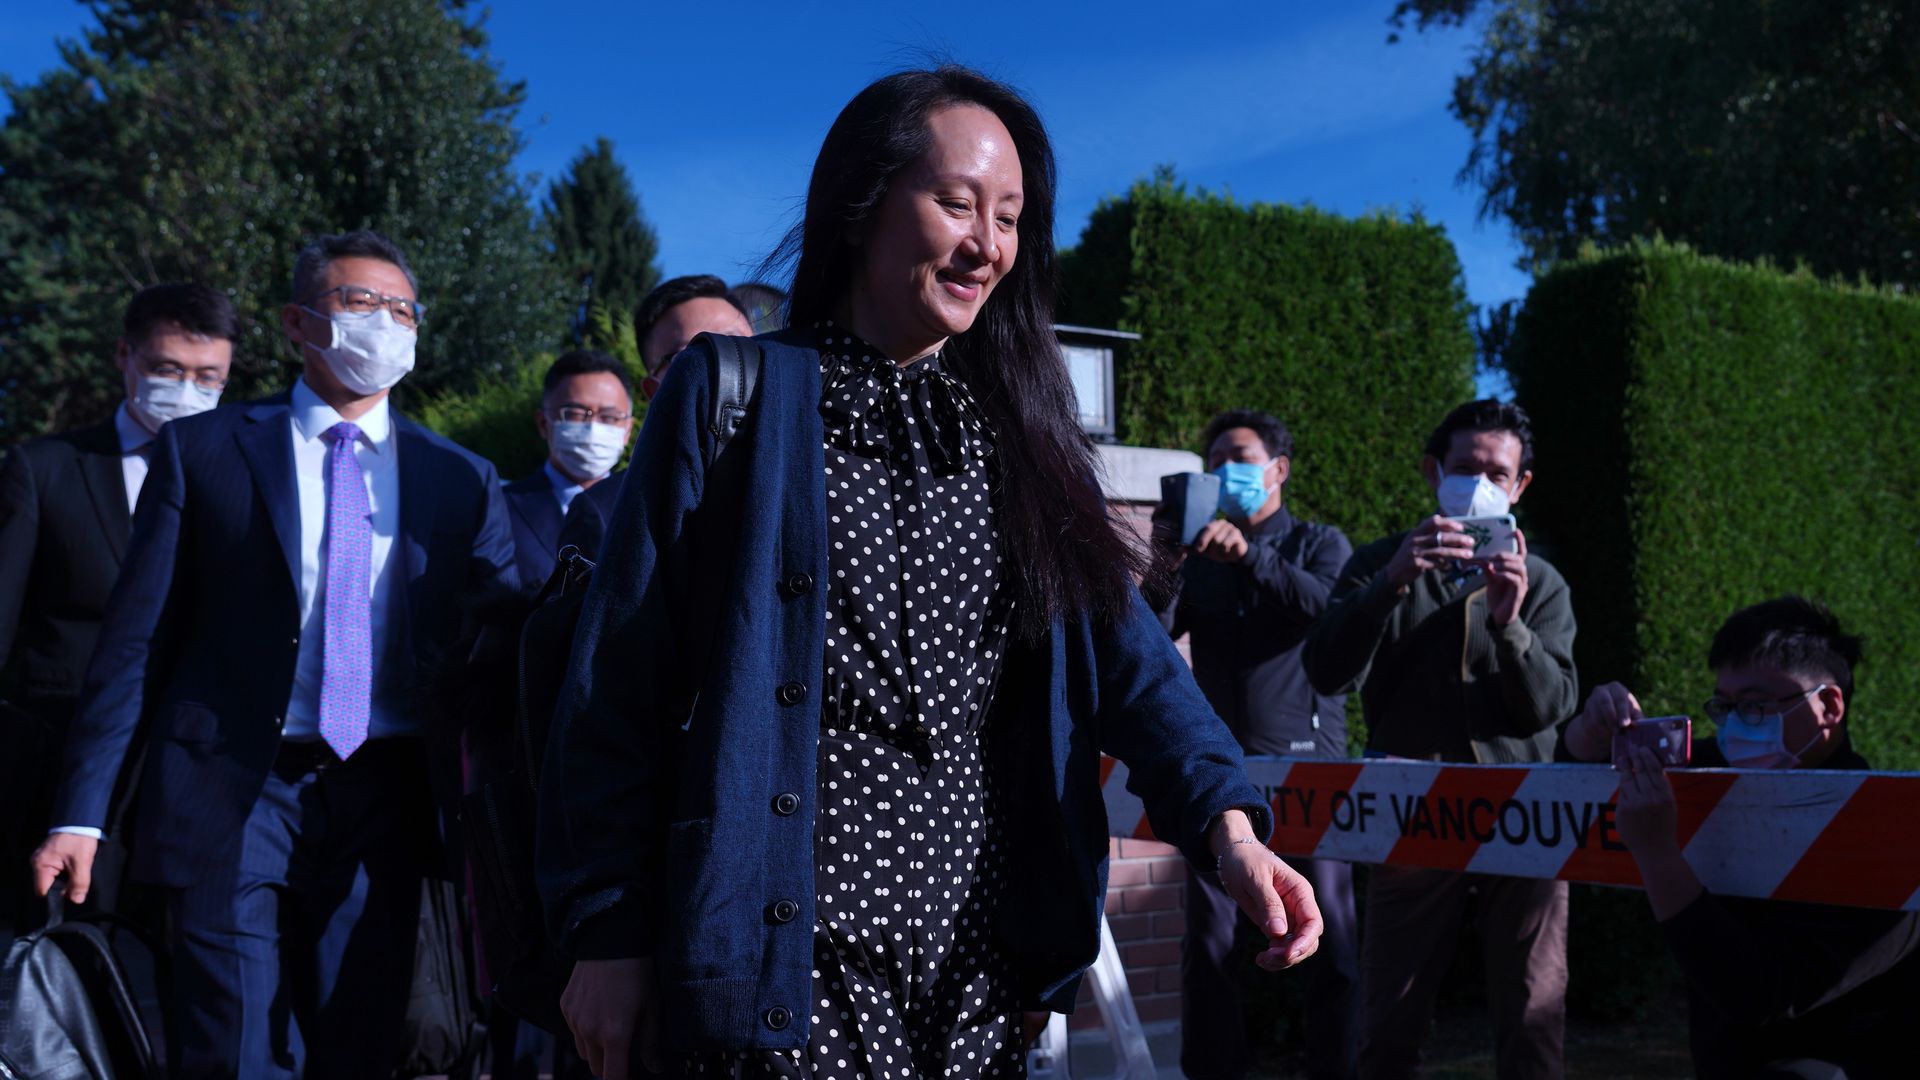 Meng Wanzhou, chief financial officer of Huawei Technologies Co., center, exits her home in Vancouver, British Columbia, Canada, on Friday, Sept. 24, 2021